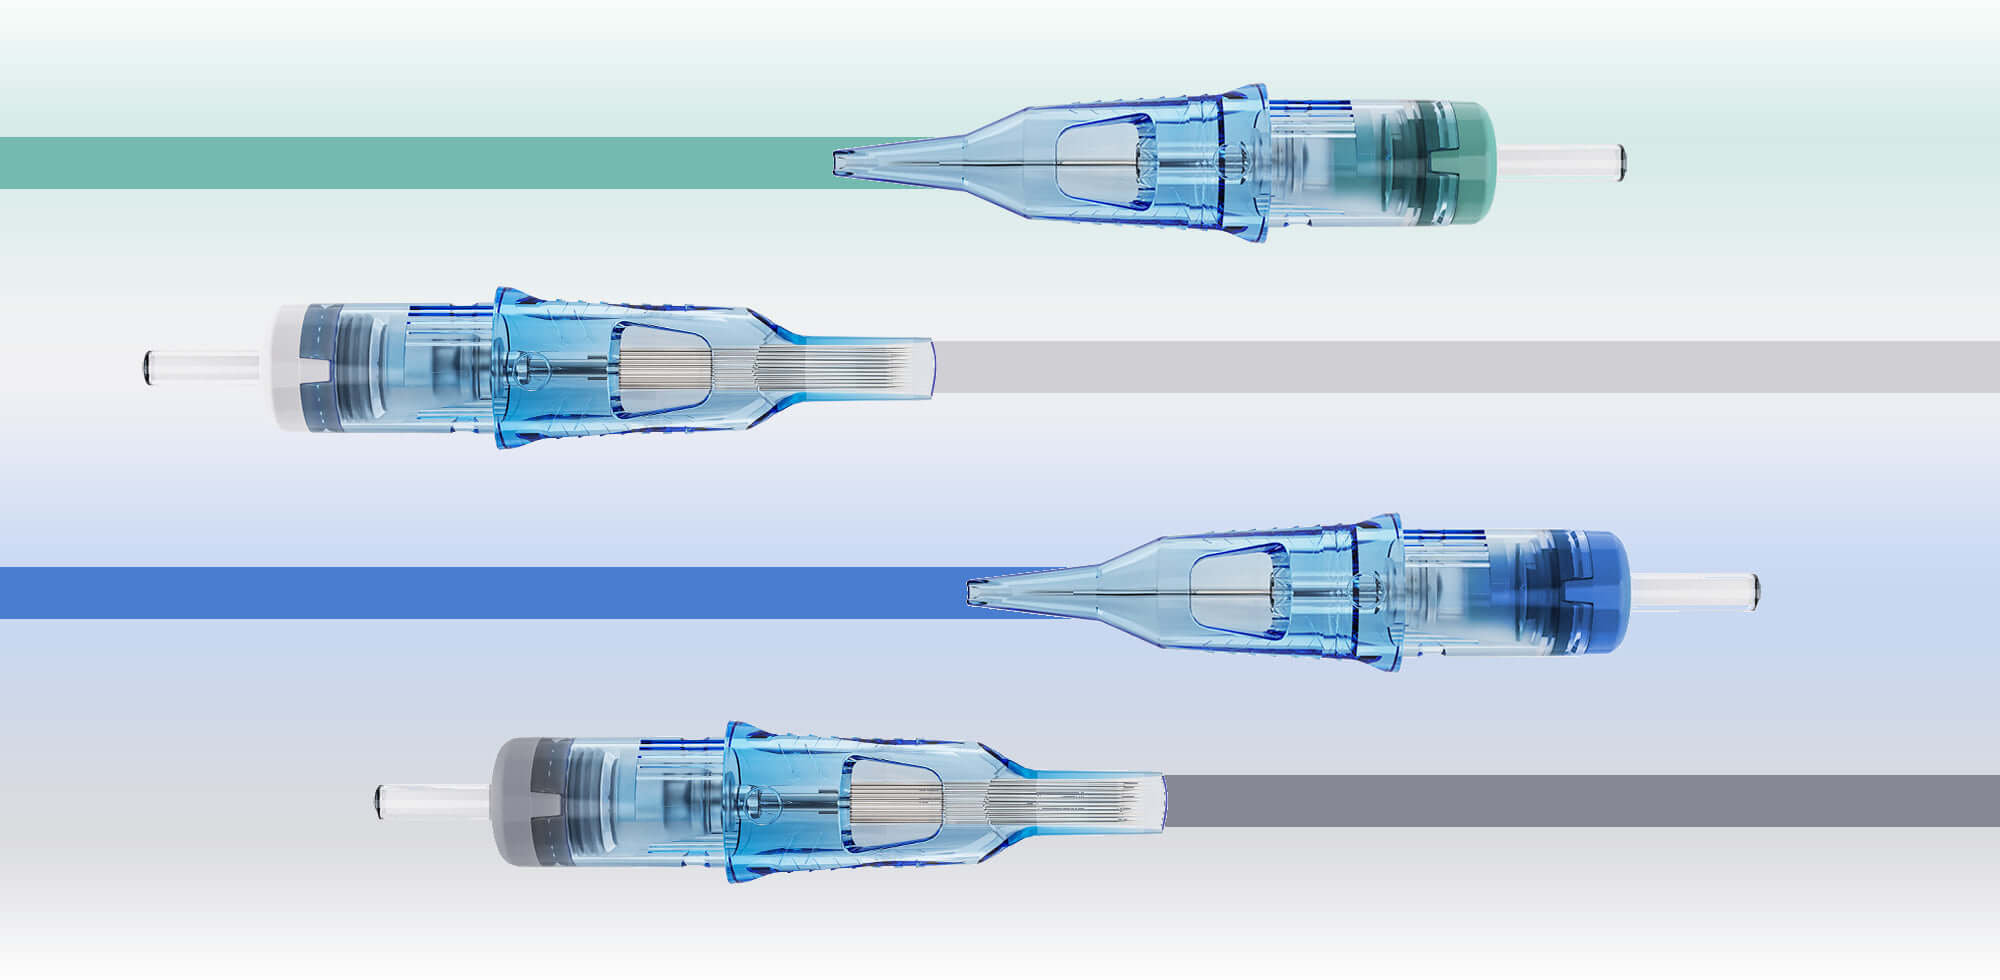 Different types of Emalla Eliot Pro Cartridge Needles are showed with different color design